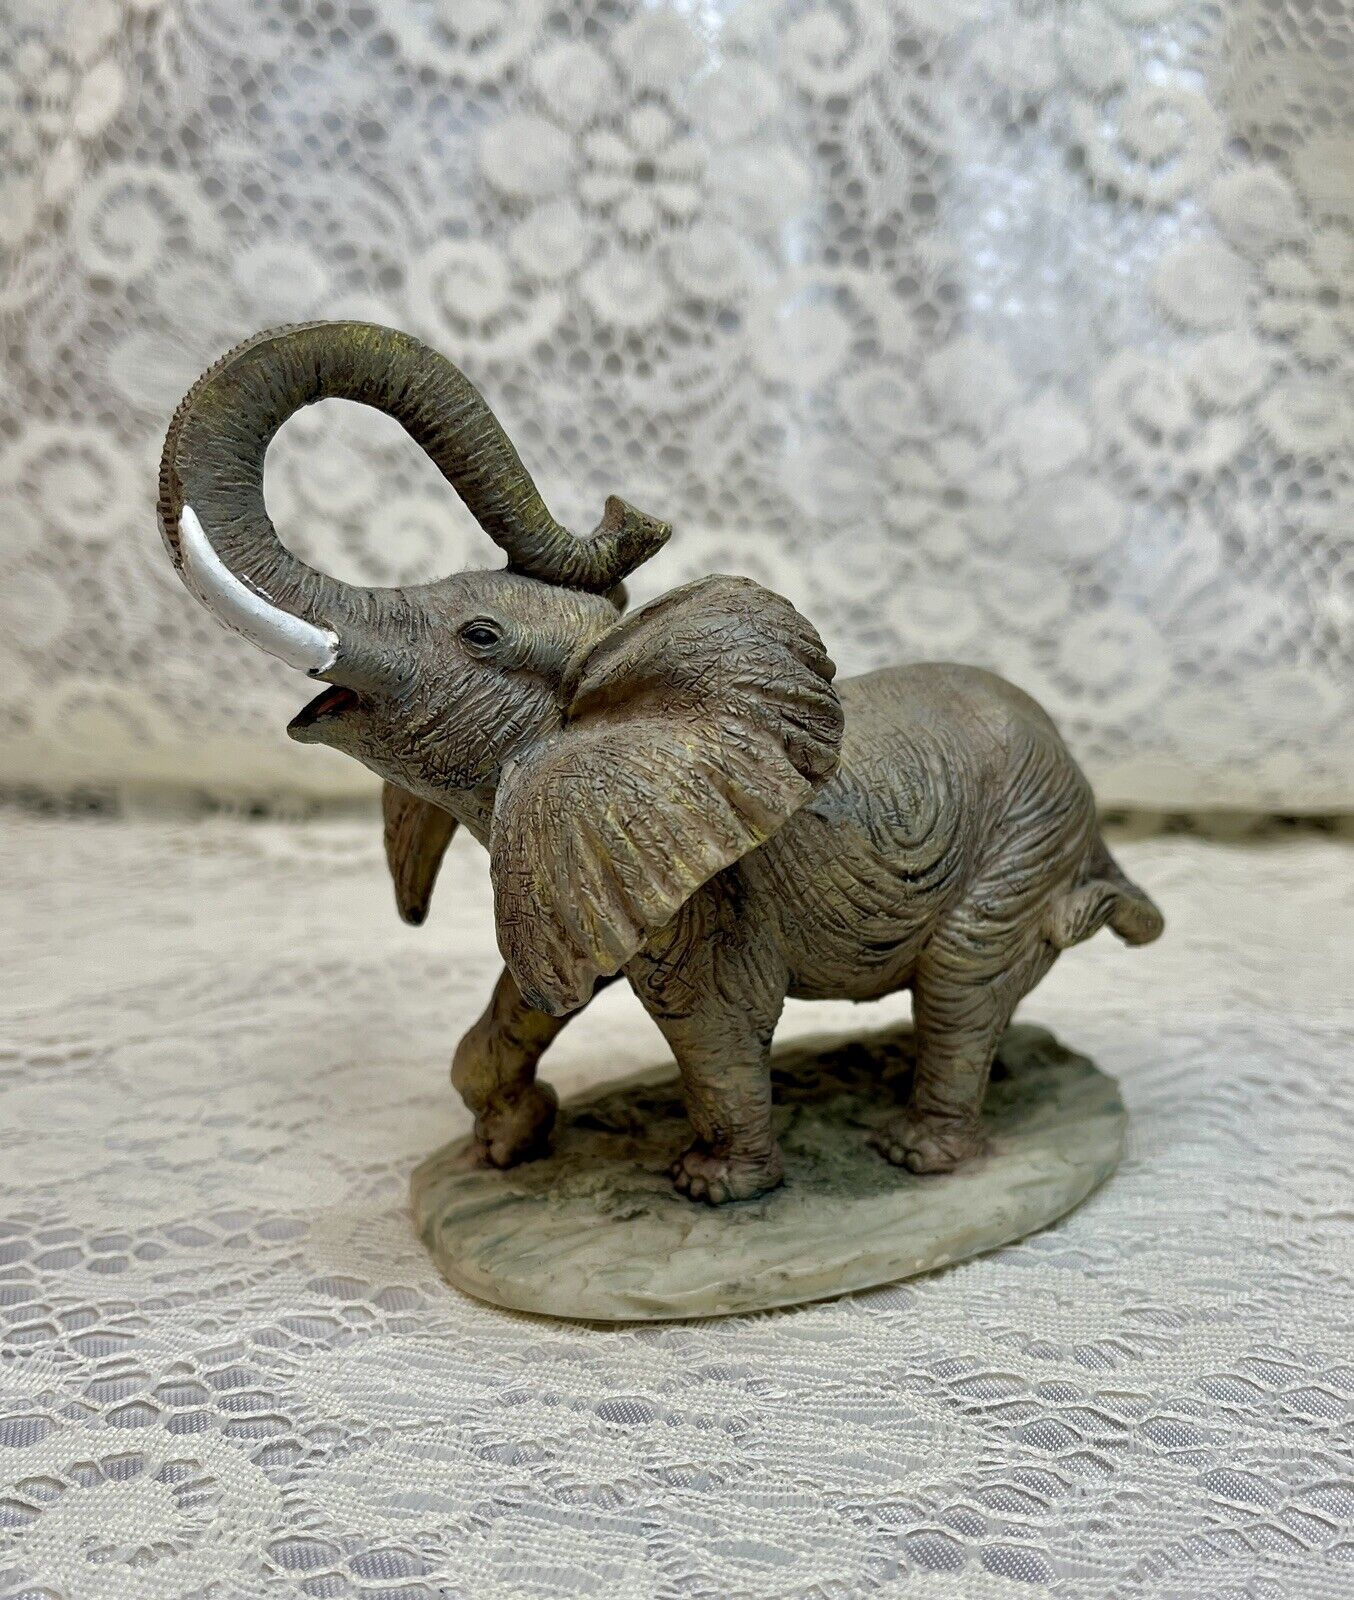 Vintage Ceramic Realistic Elephant Figurine Statue Standing On Base, Trunk Up